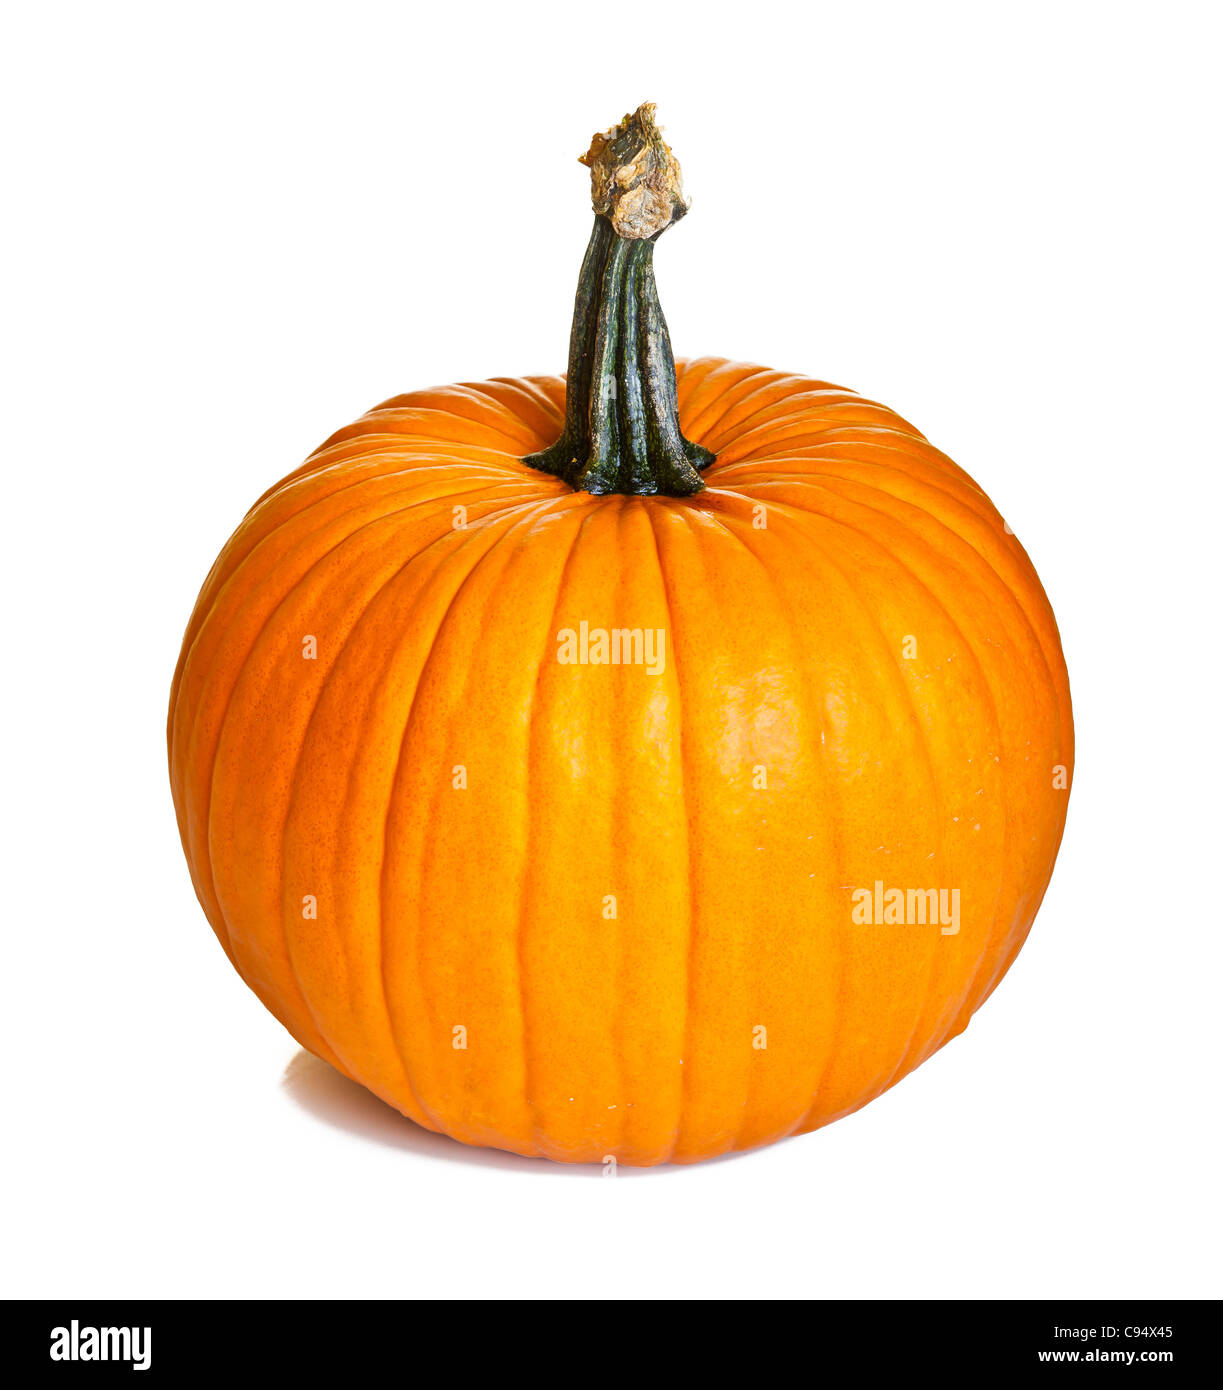 Isolated pumpkins Stock Photo